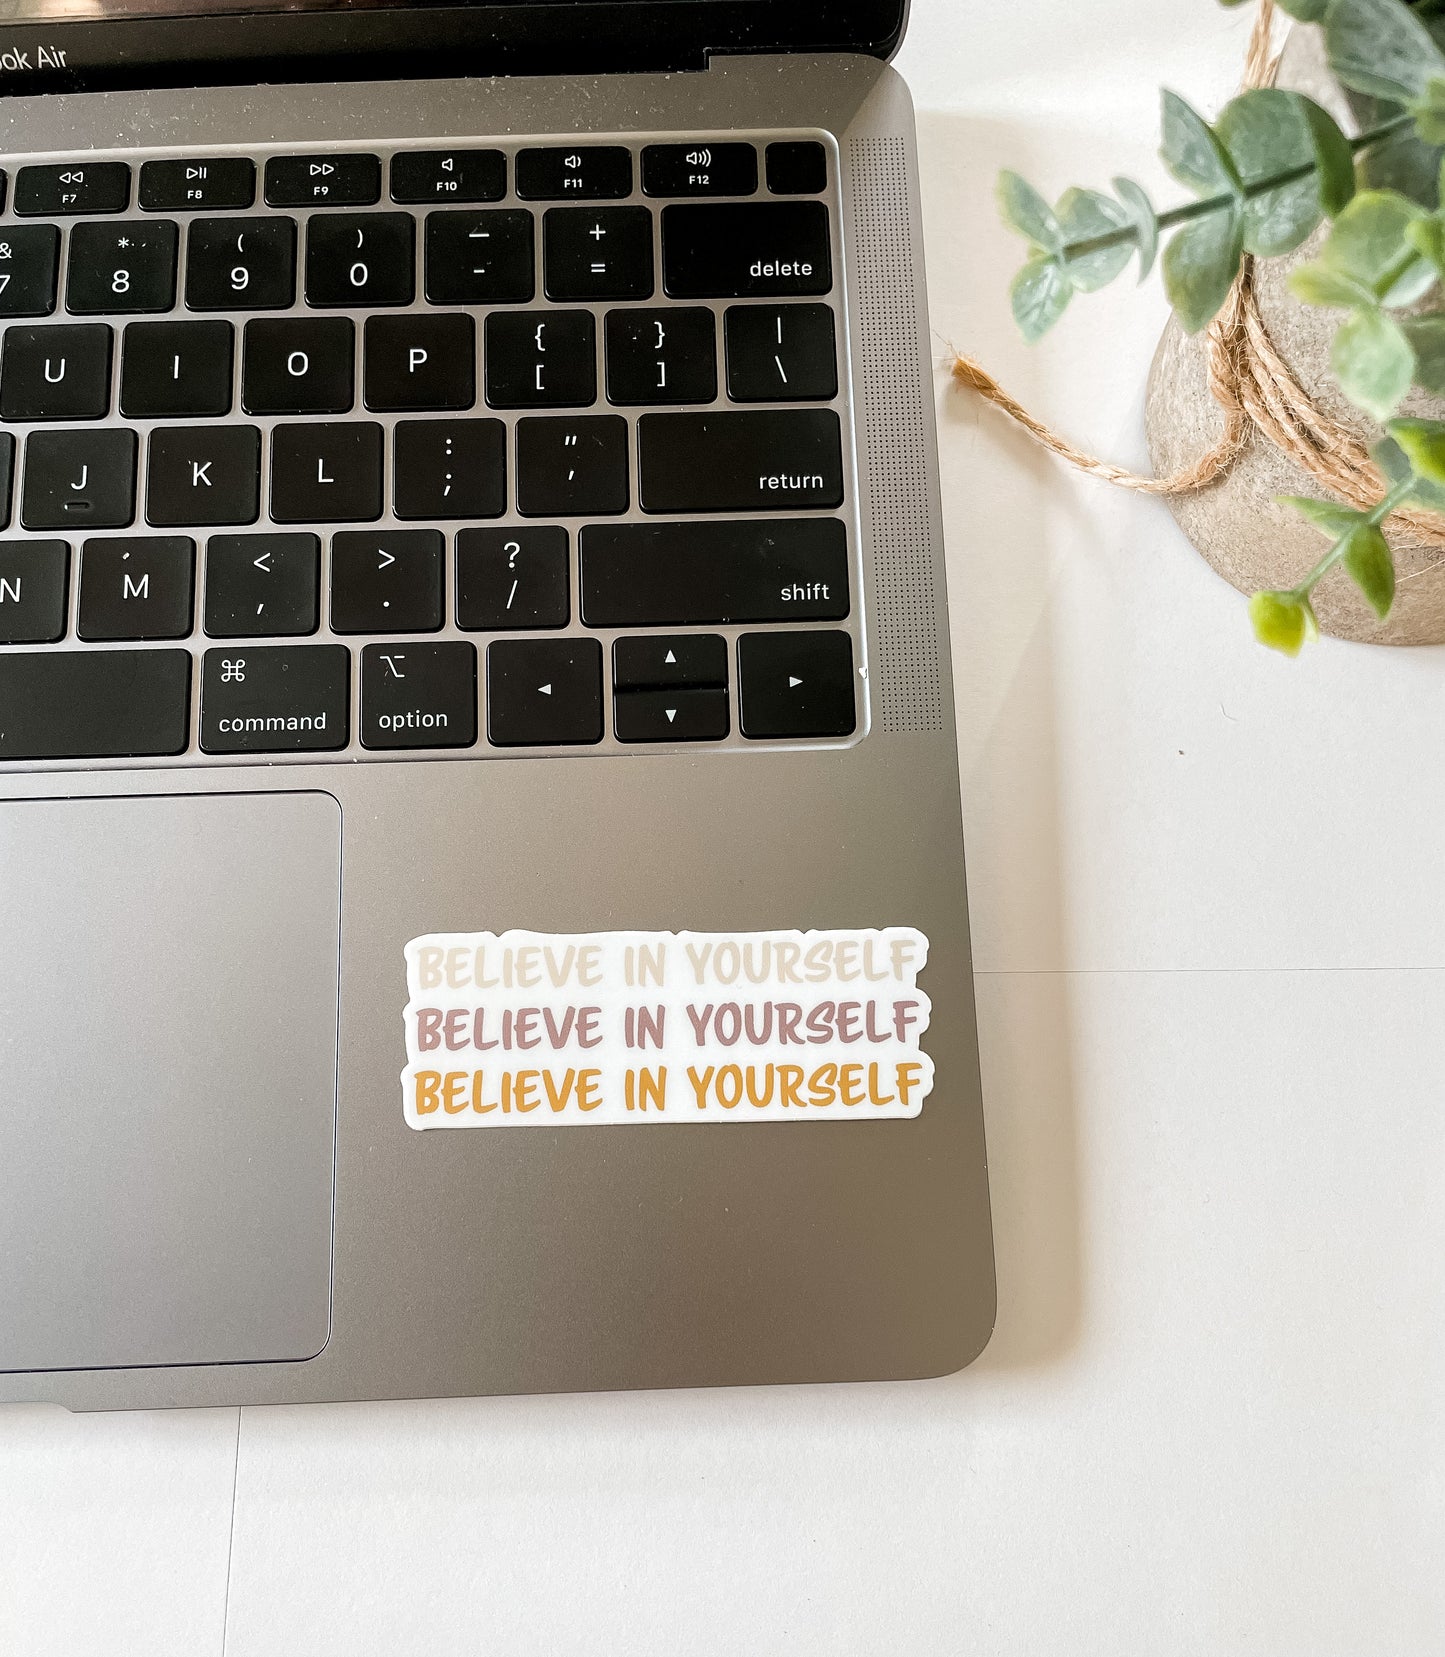 believe in yourself sticker pictured on laptop